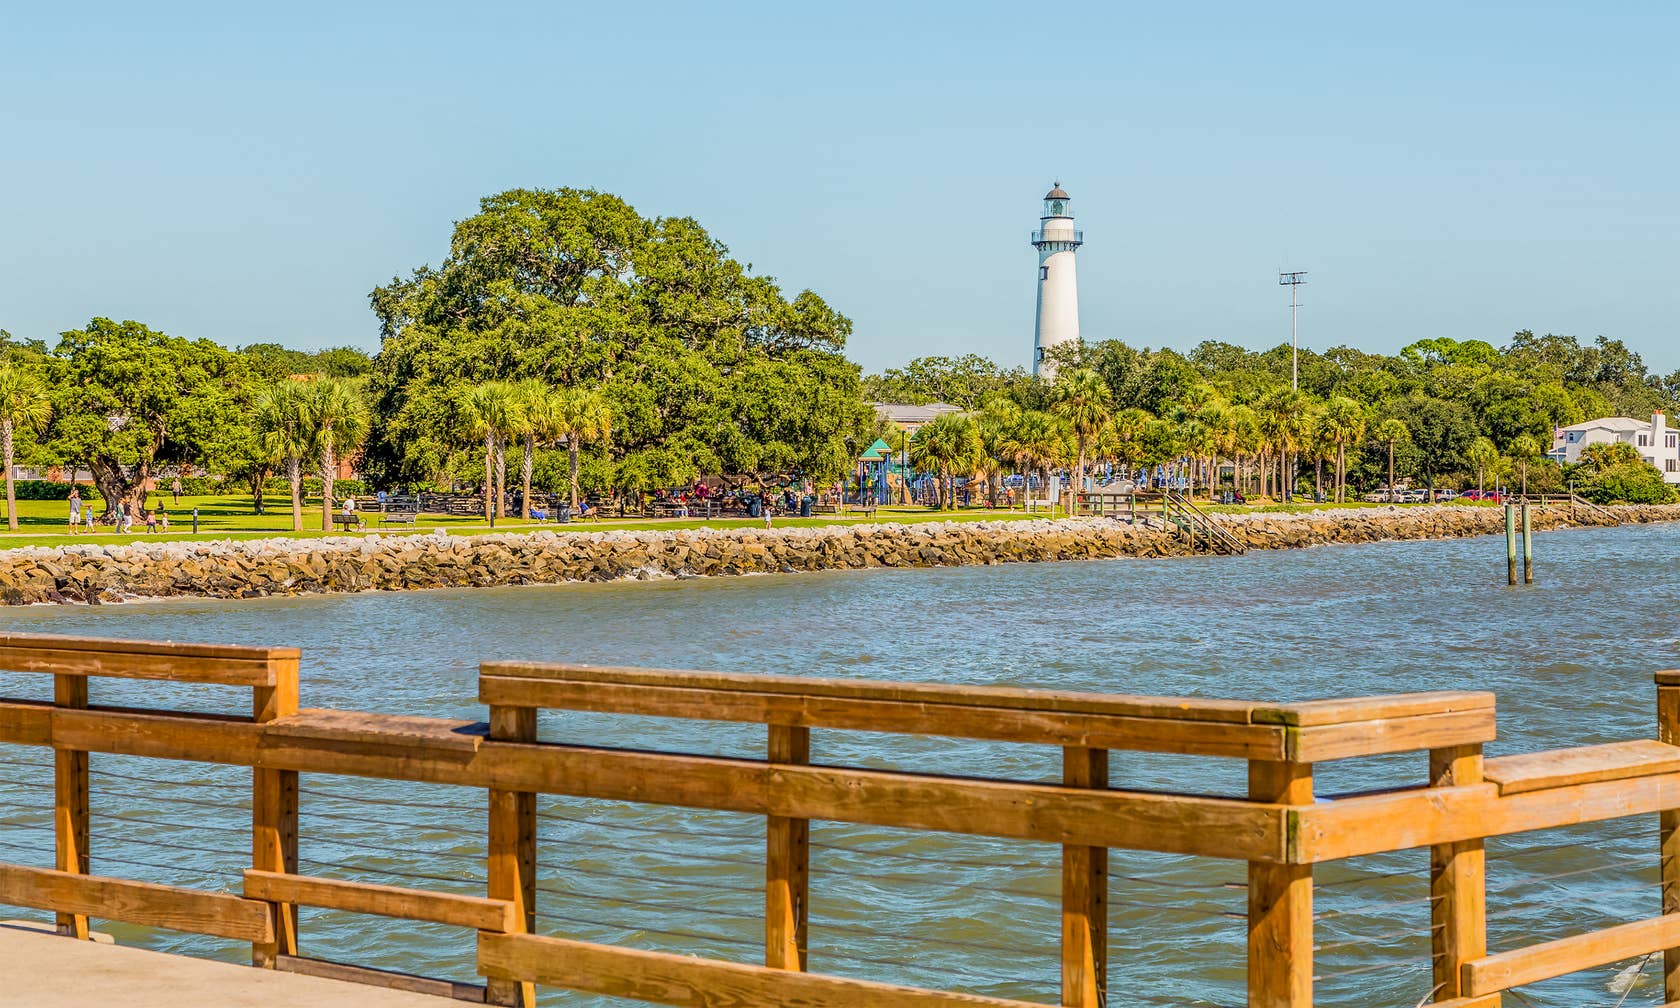 Vacation rentals in St. Simons Island